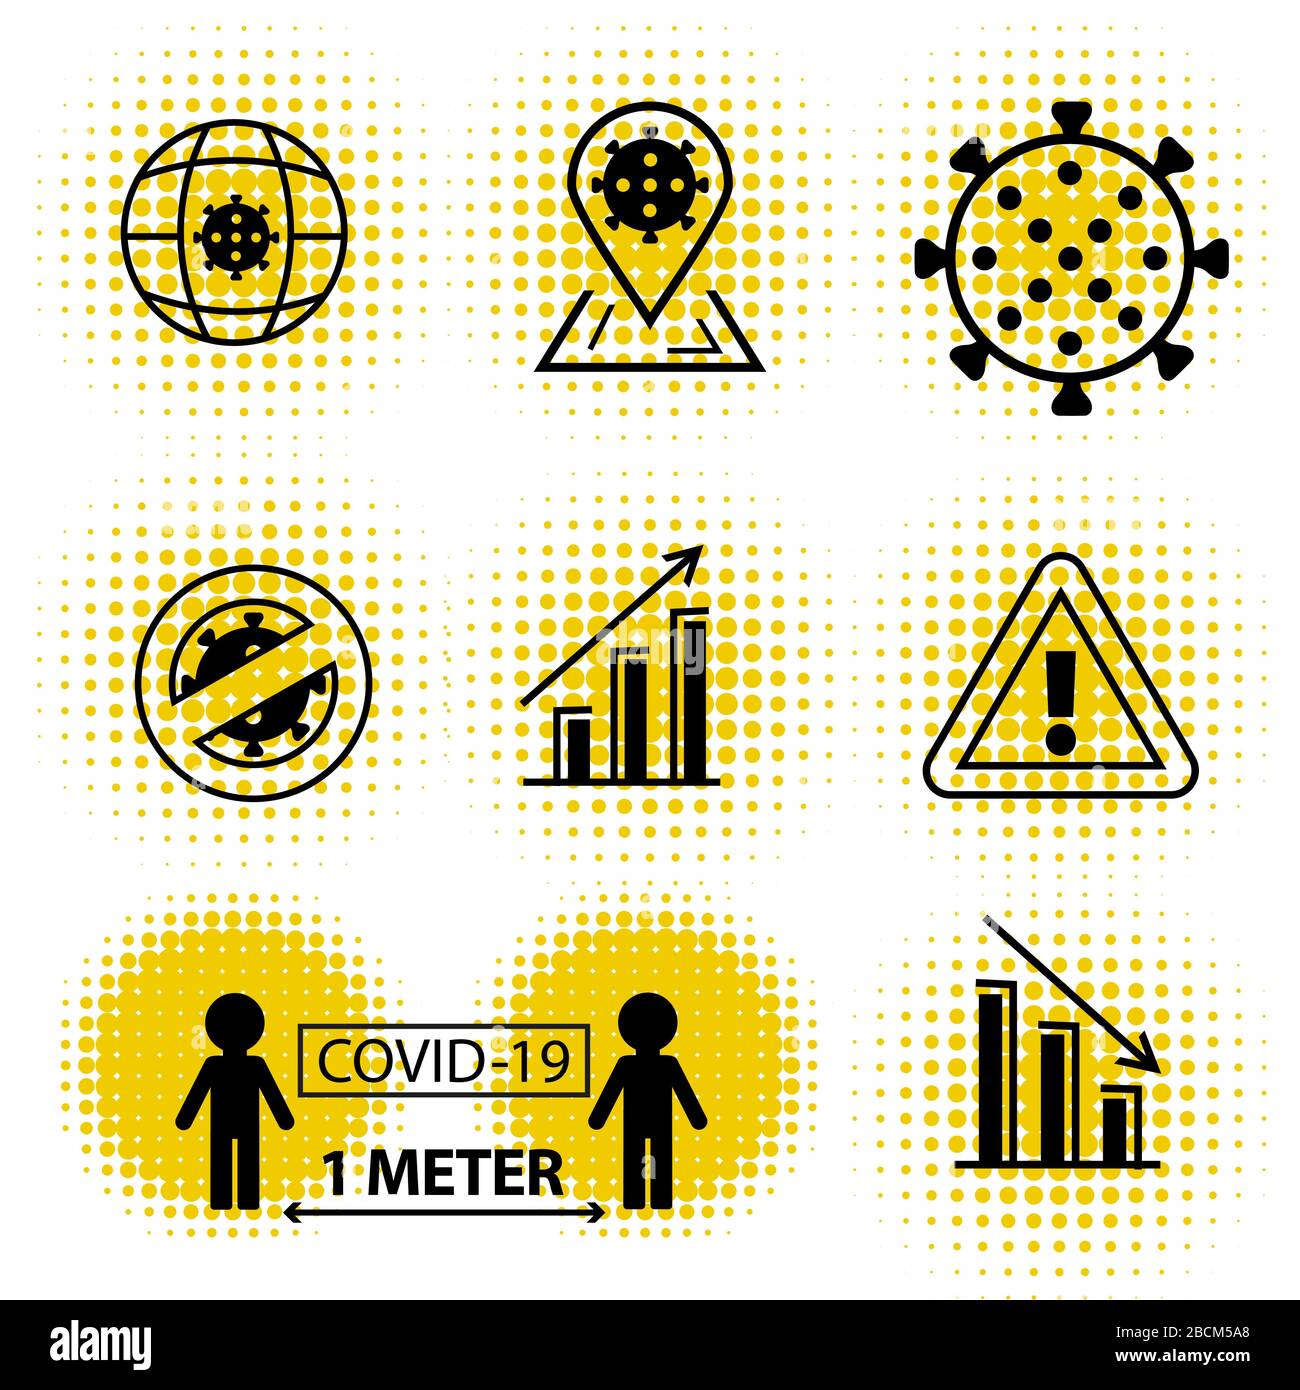 Coronavirus icons. Line black icons with yellow spay halftone. Keep distance 1 meter. Business losses. Stock Vector